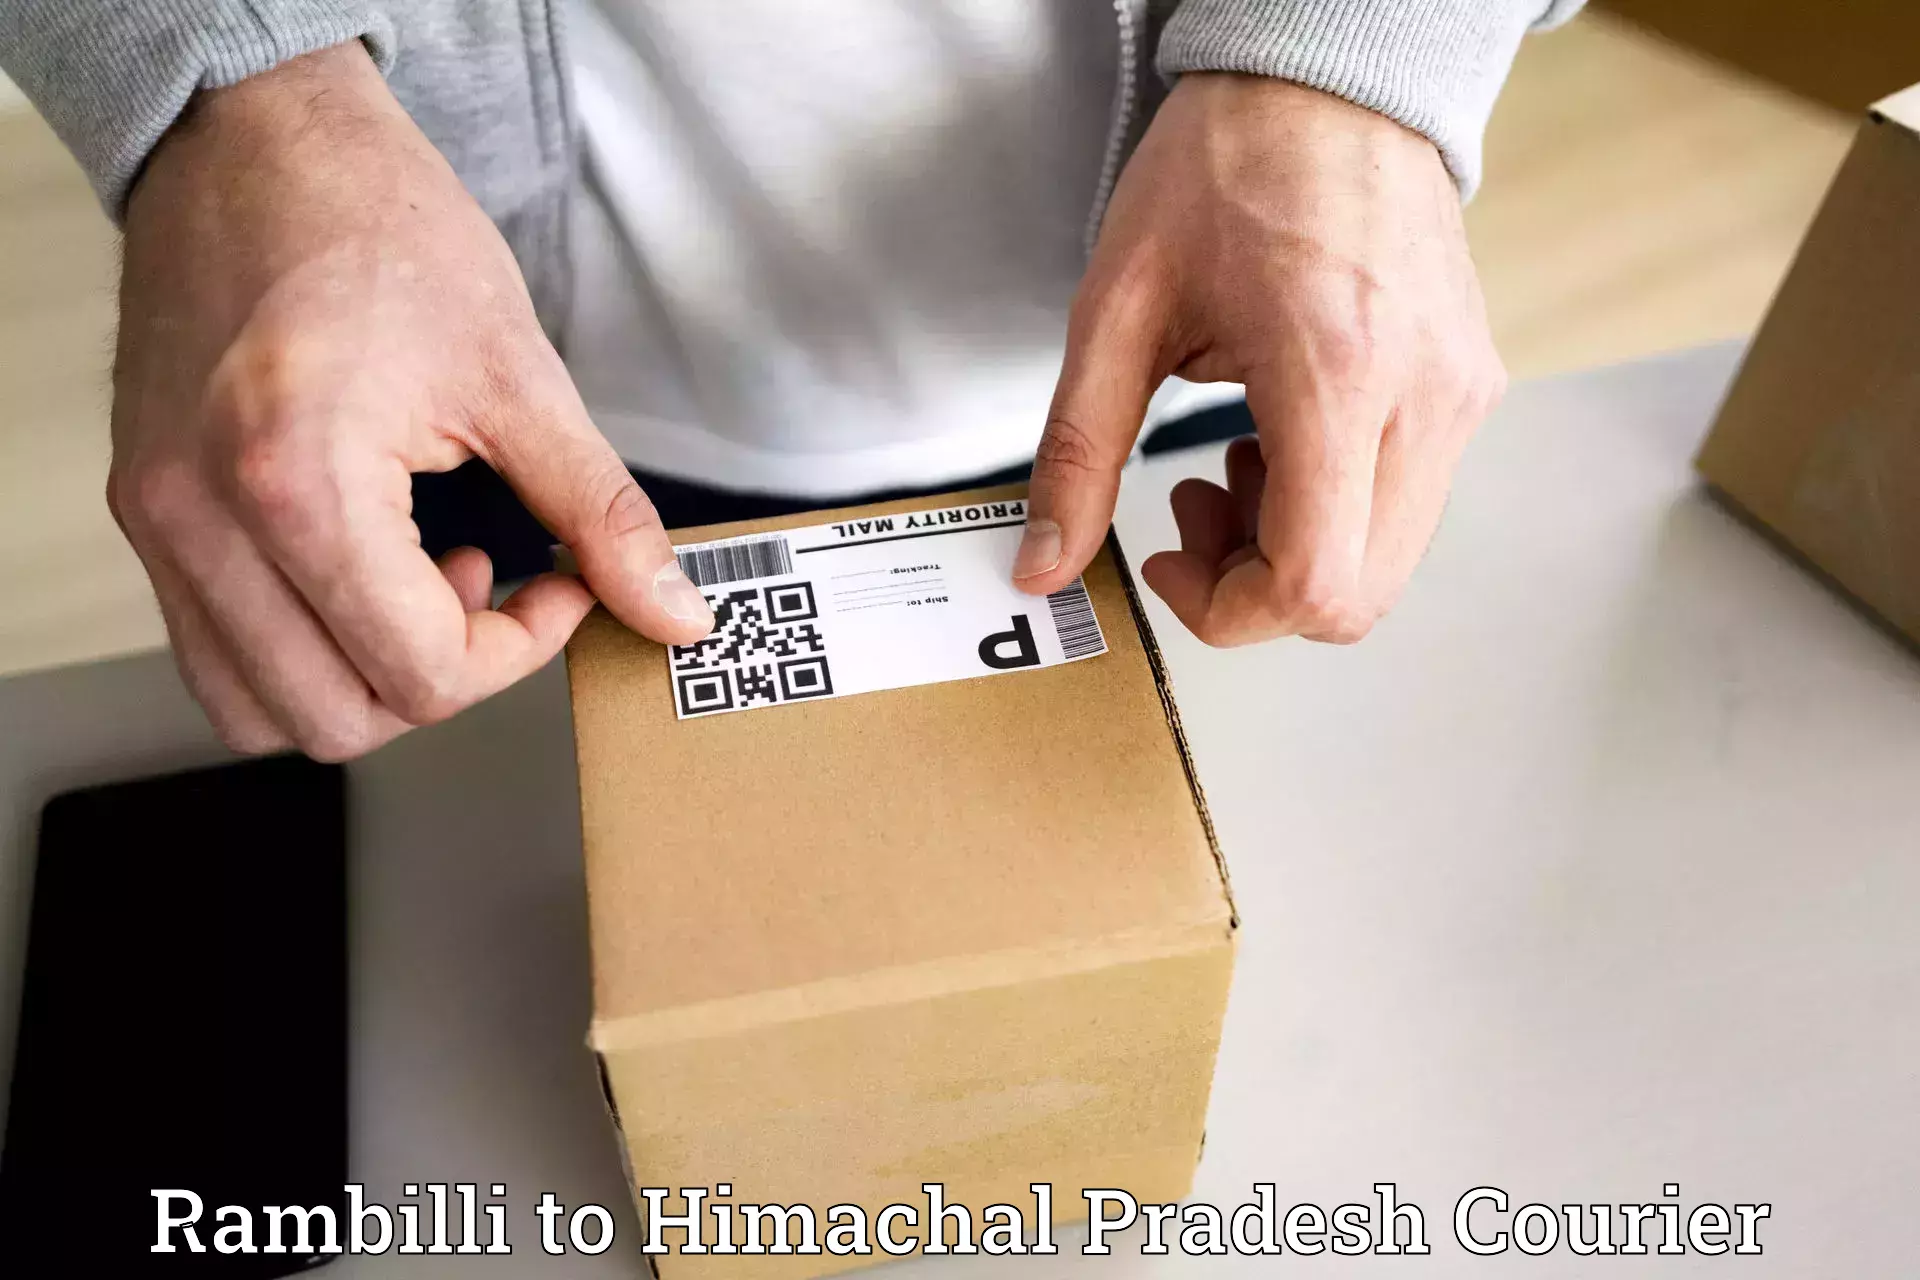 Global courier networks Rambilli to Himachal Pradesh